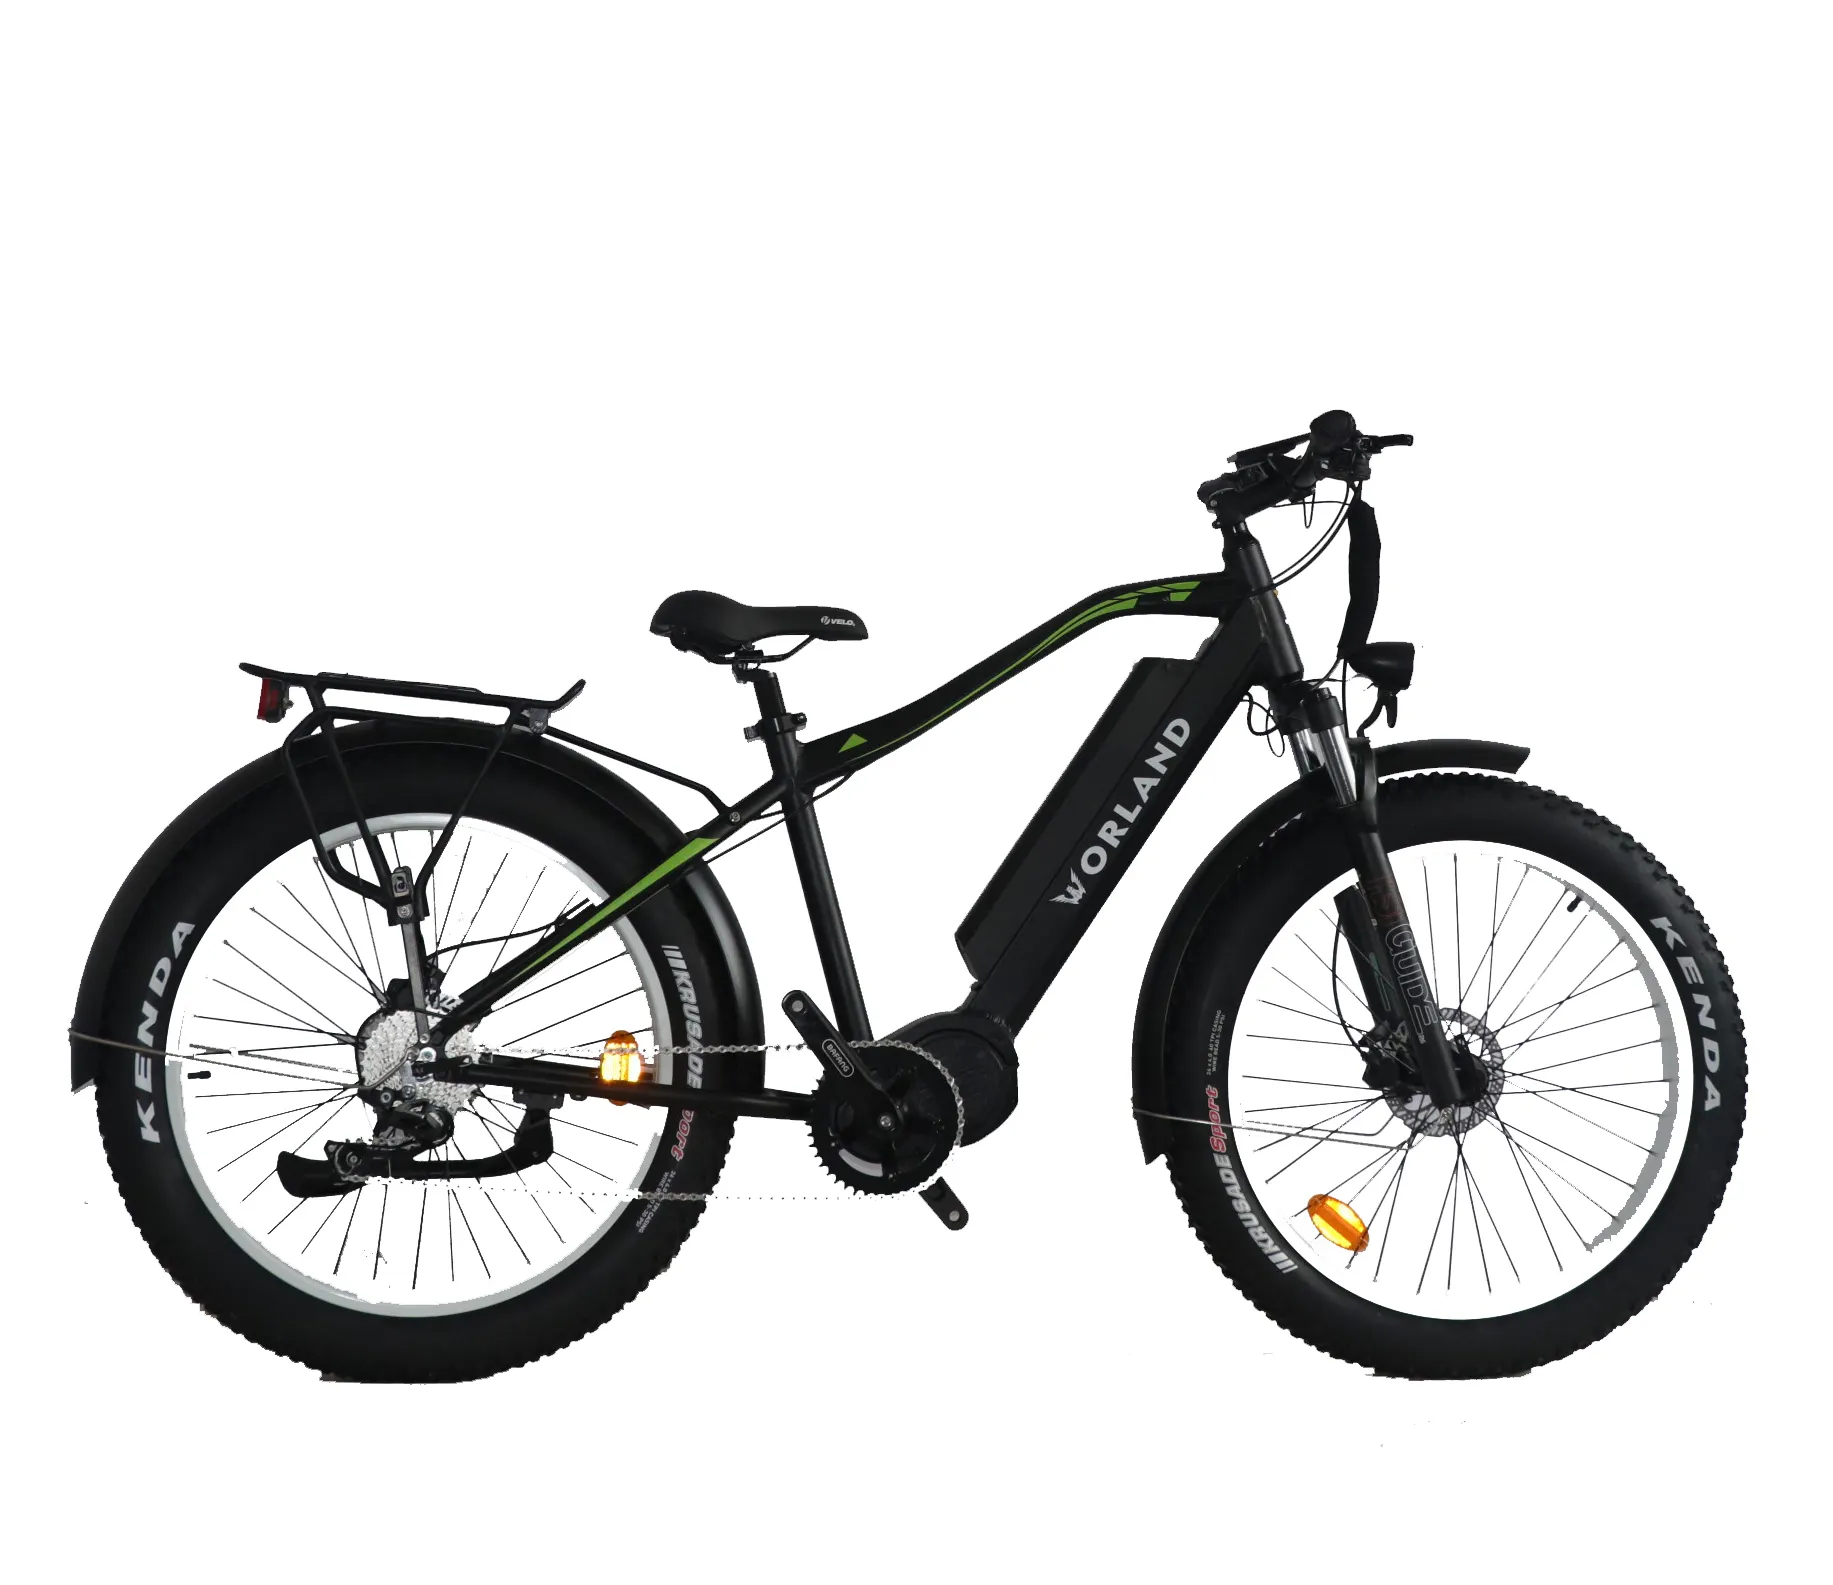 Giant e bicycle electric fat mountain bike 1000 watt voltage front fork